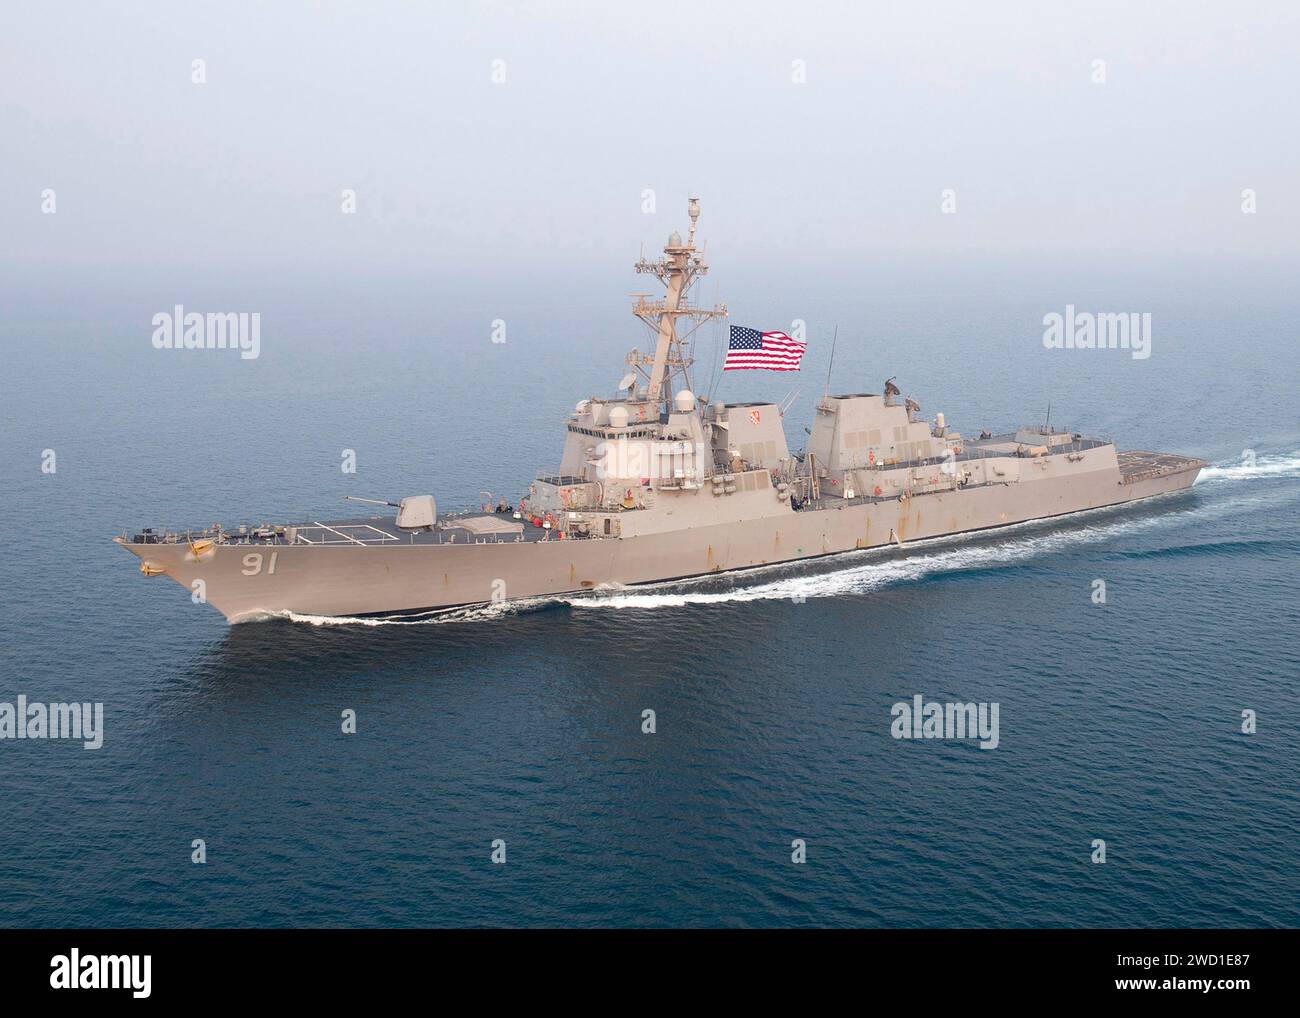 The Arleigh Burke-class guided-missile destroyer USS Pinckney in transit. Stock Photo